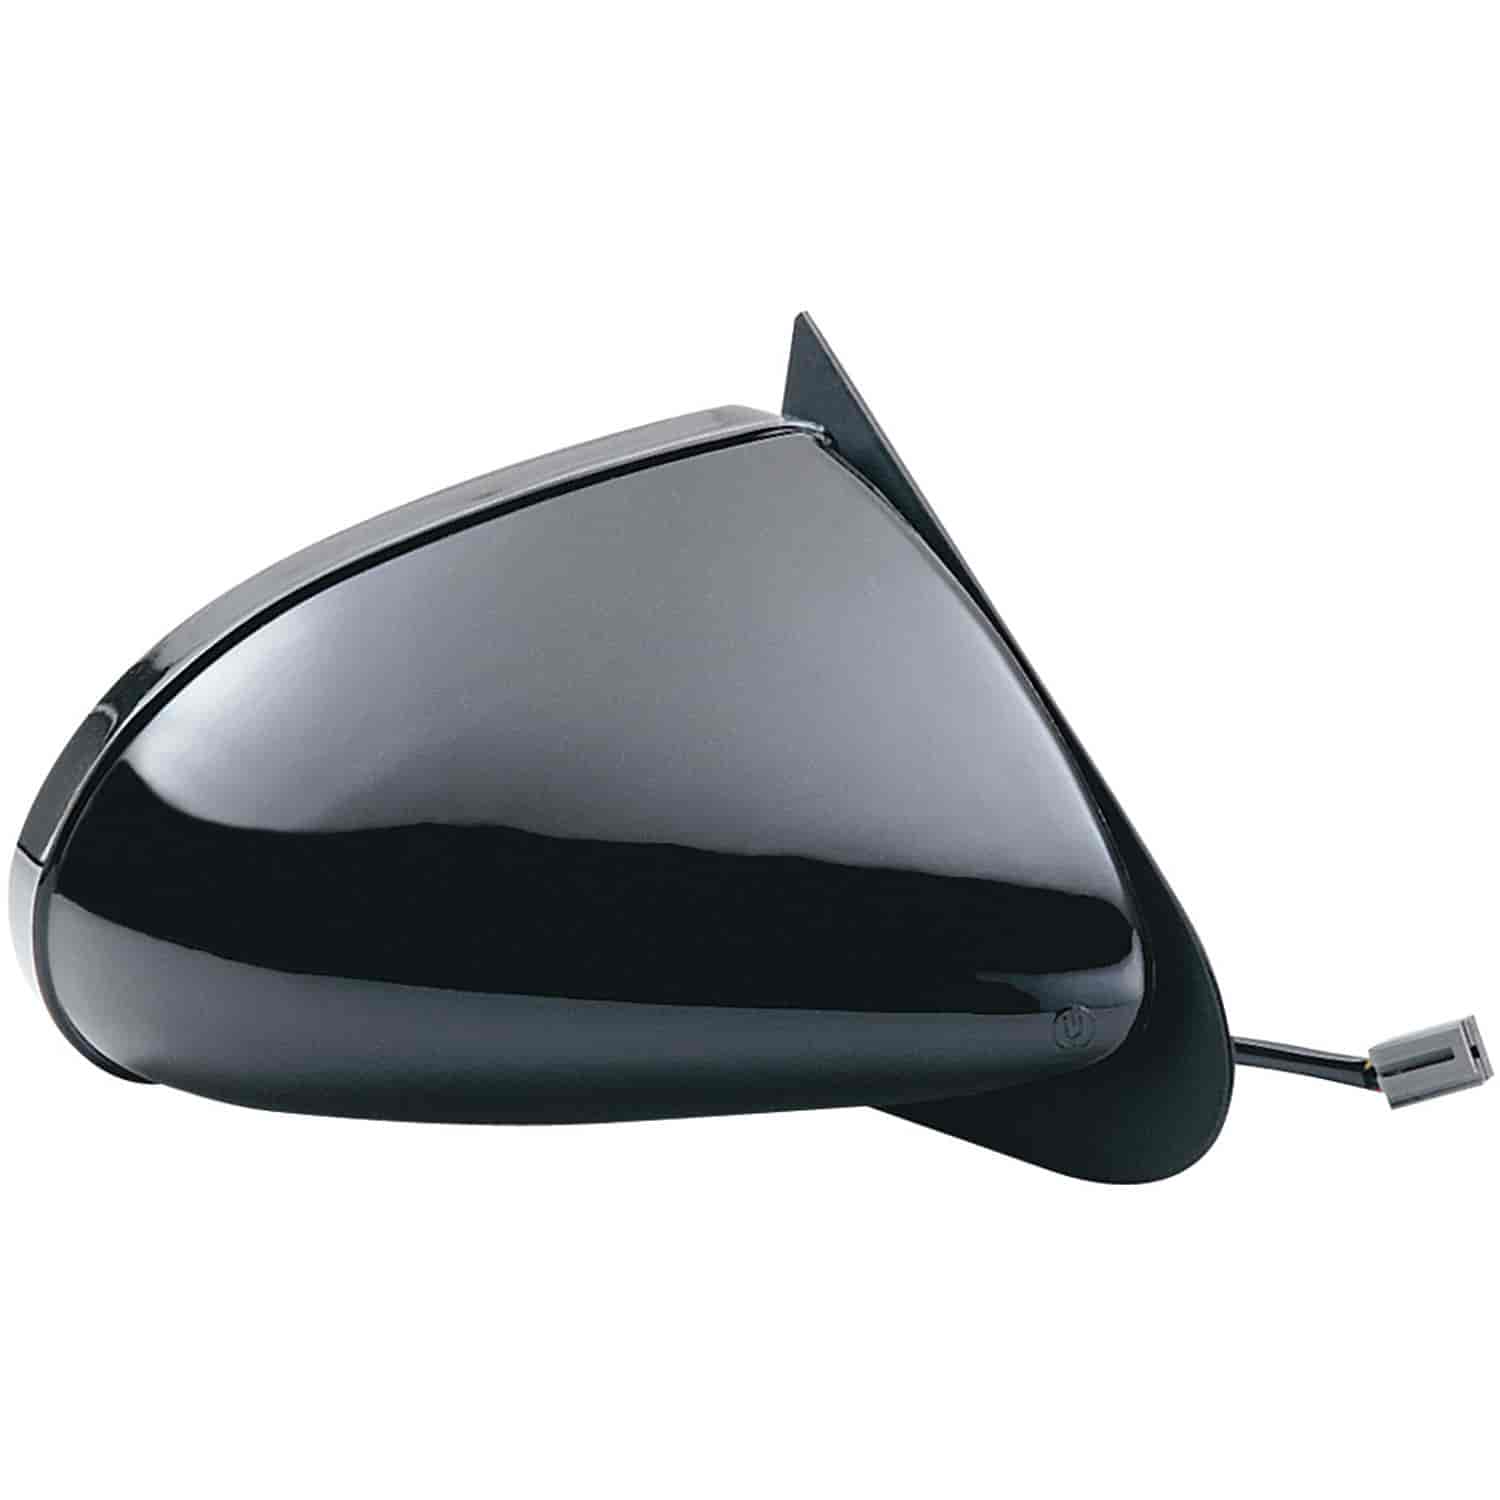 OEM Style Replacement mirror for 89-97 Ford Thunderbird